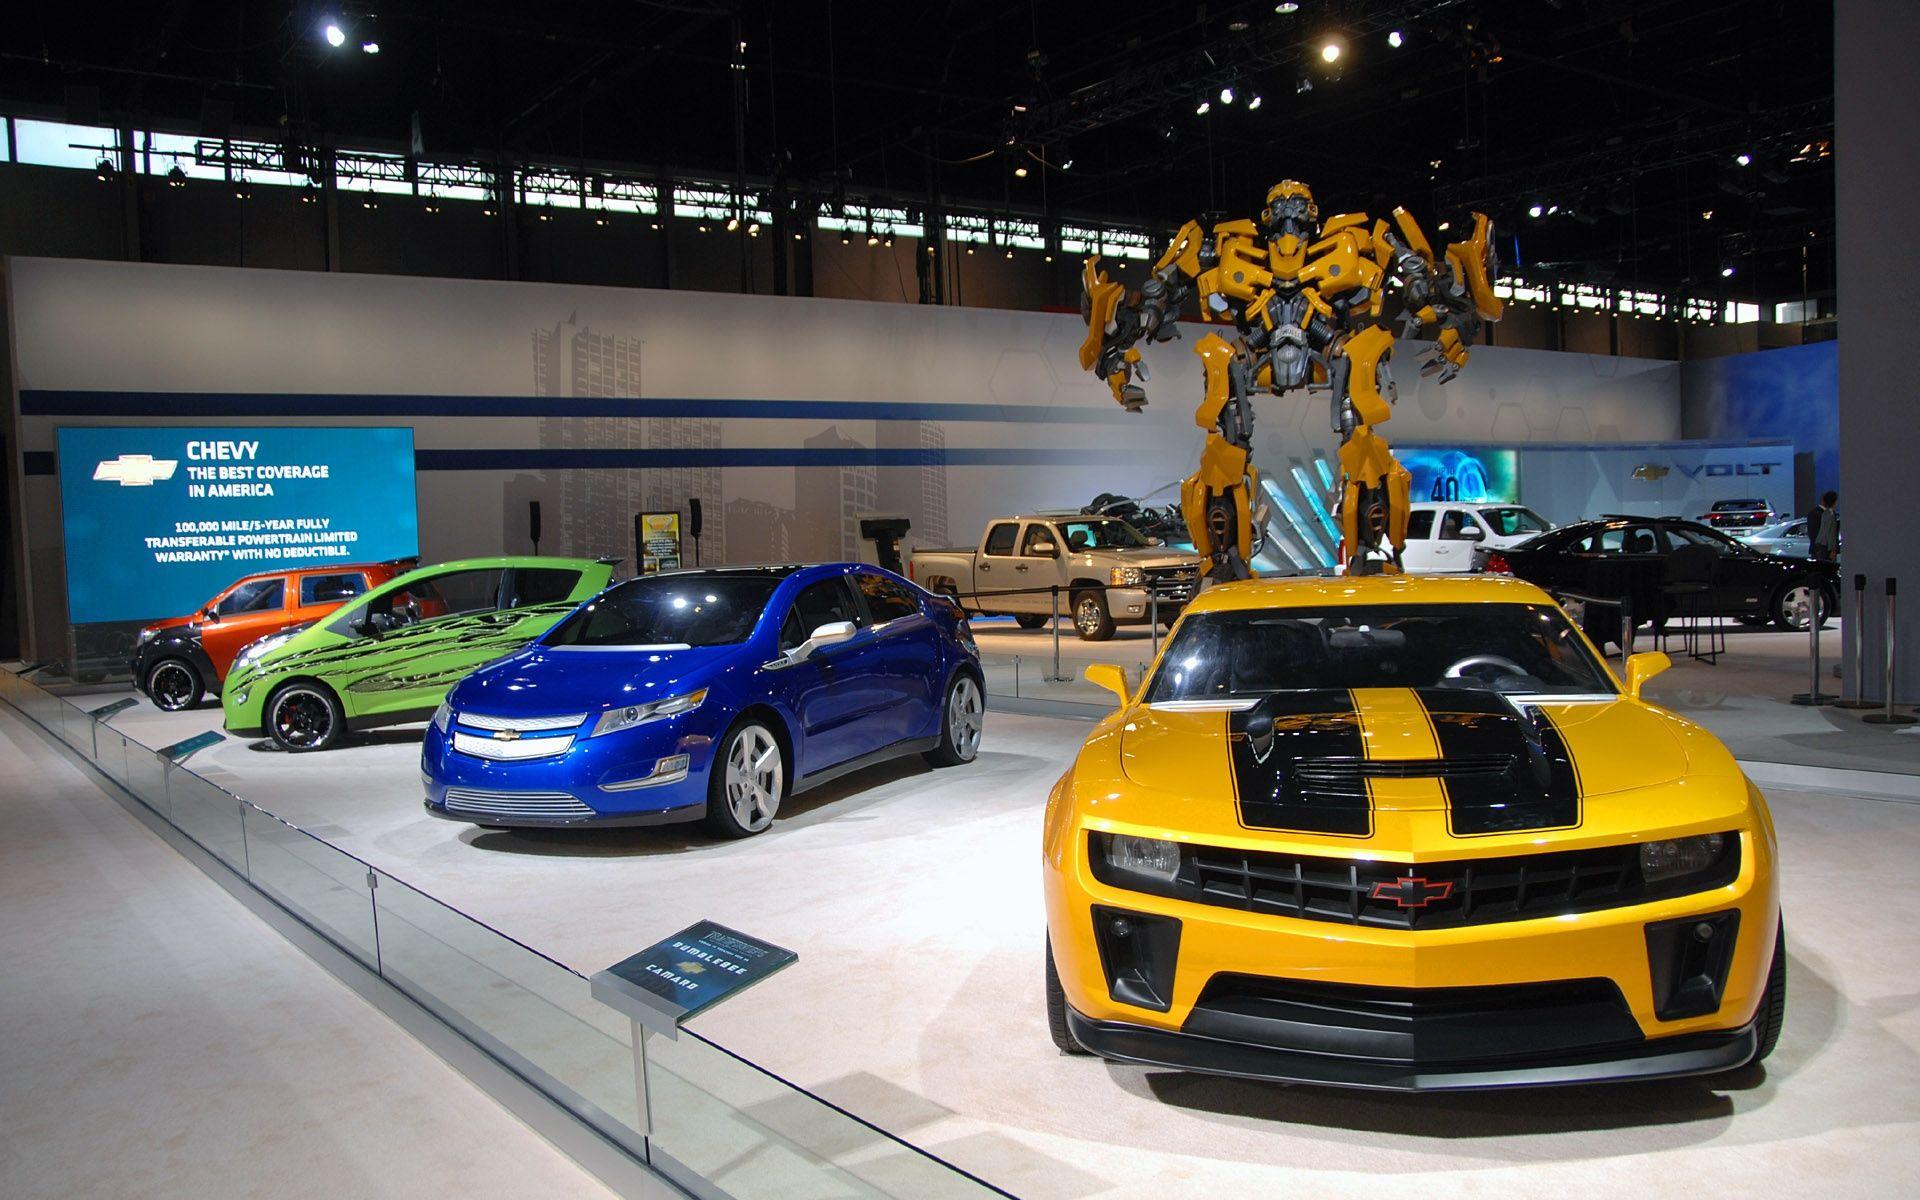 Transformers 2 chicago cars